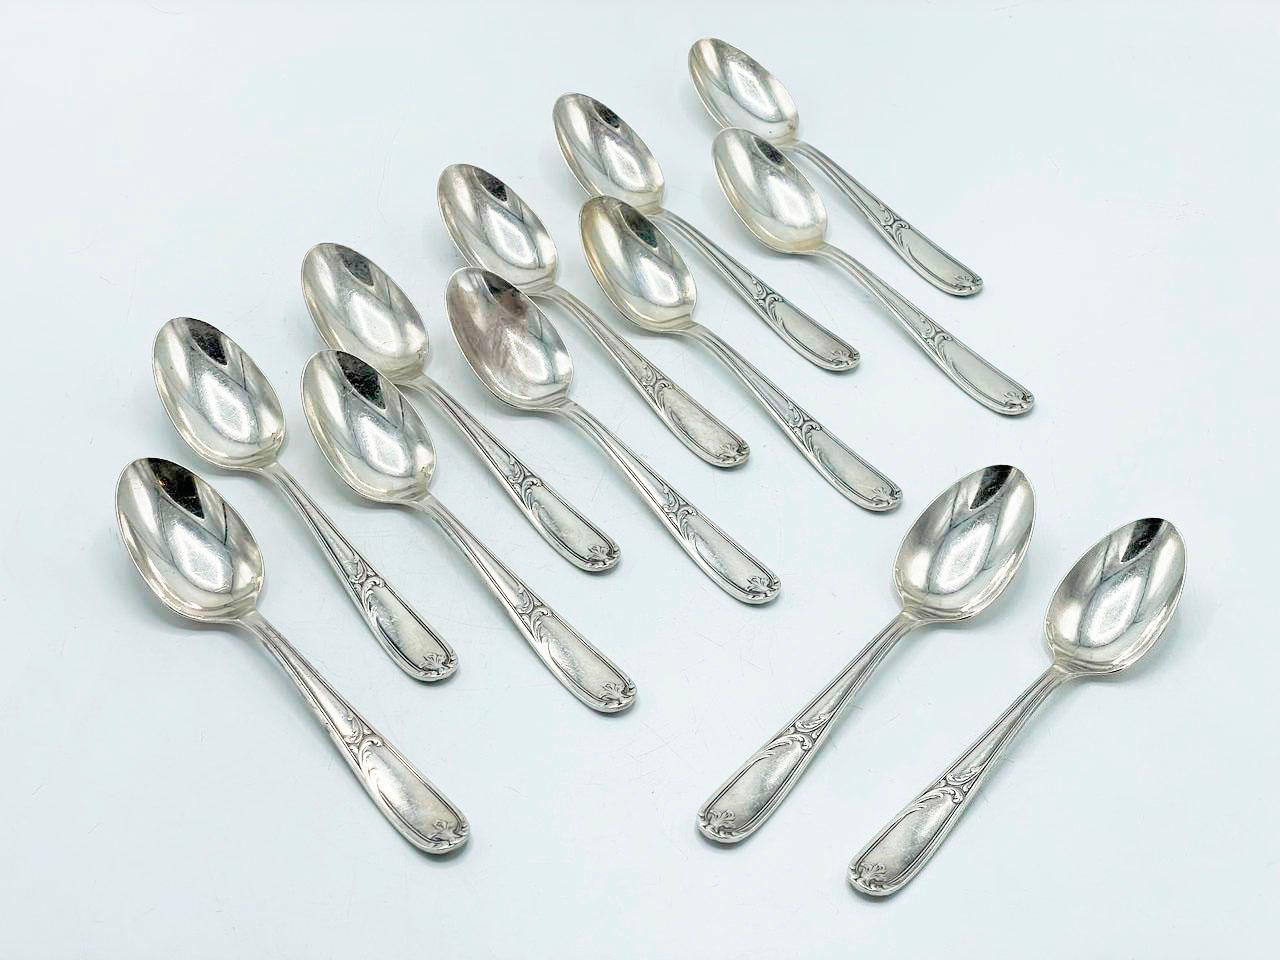 Christofle Made in Argentina, Flatware art nouveau in Silverplated For Sale 8